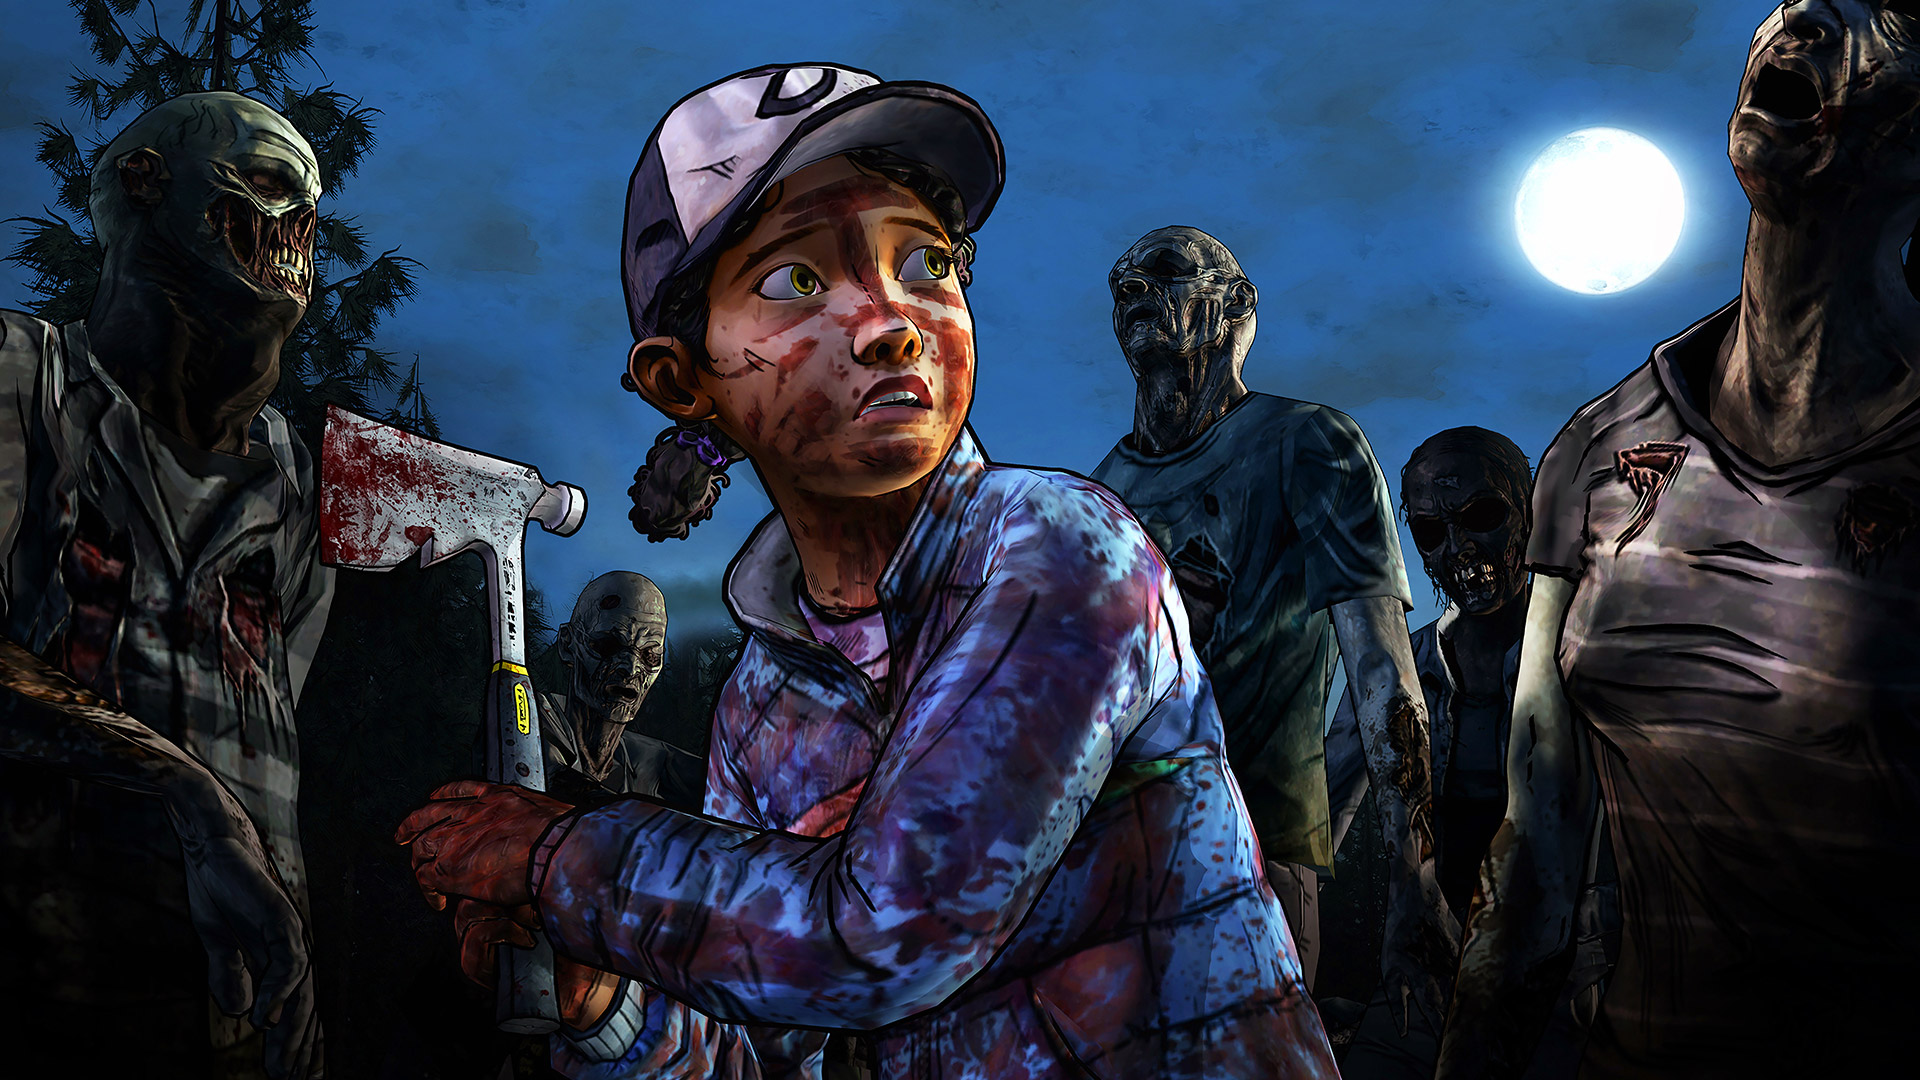 A screenshots of Clementine surrounded by zombies from The Walking Dead: The&nbsp;Telltale&nbsp;Series season 2